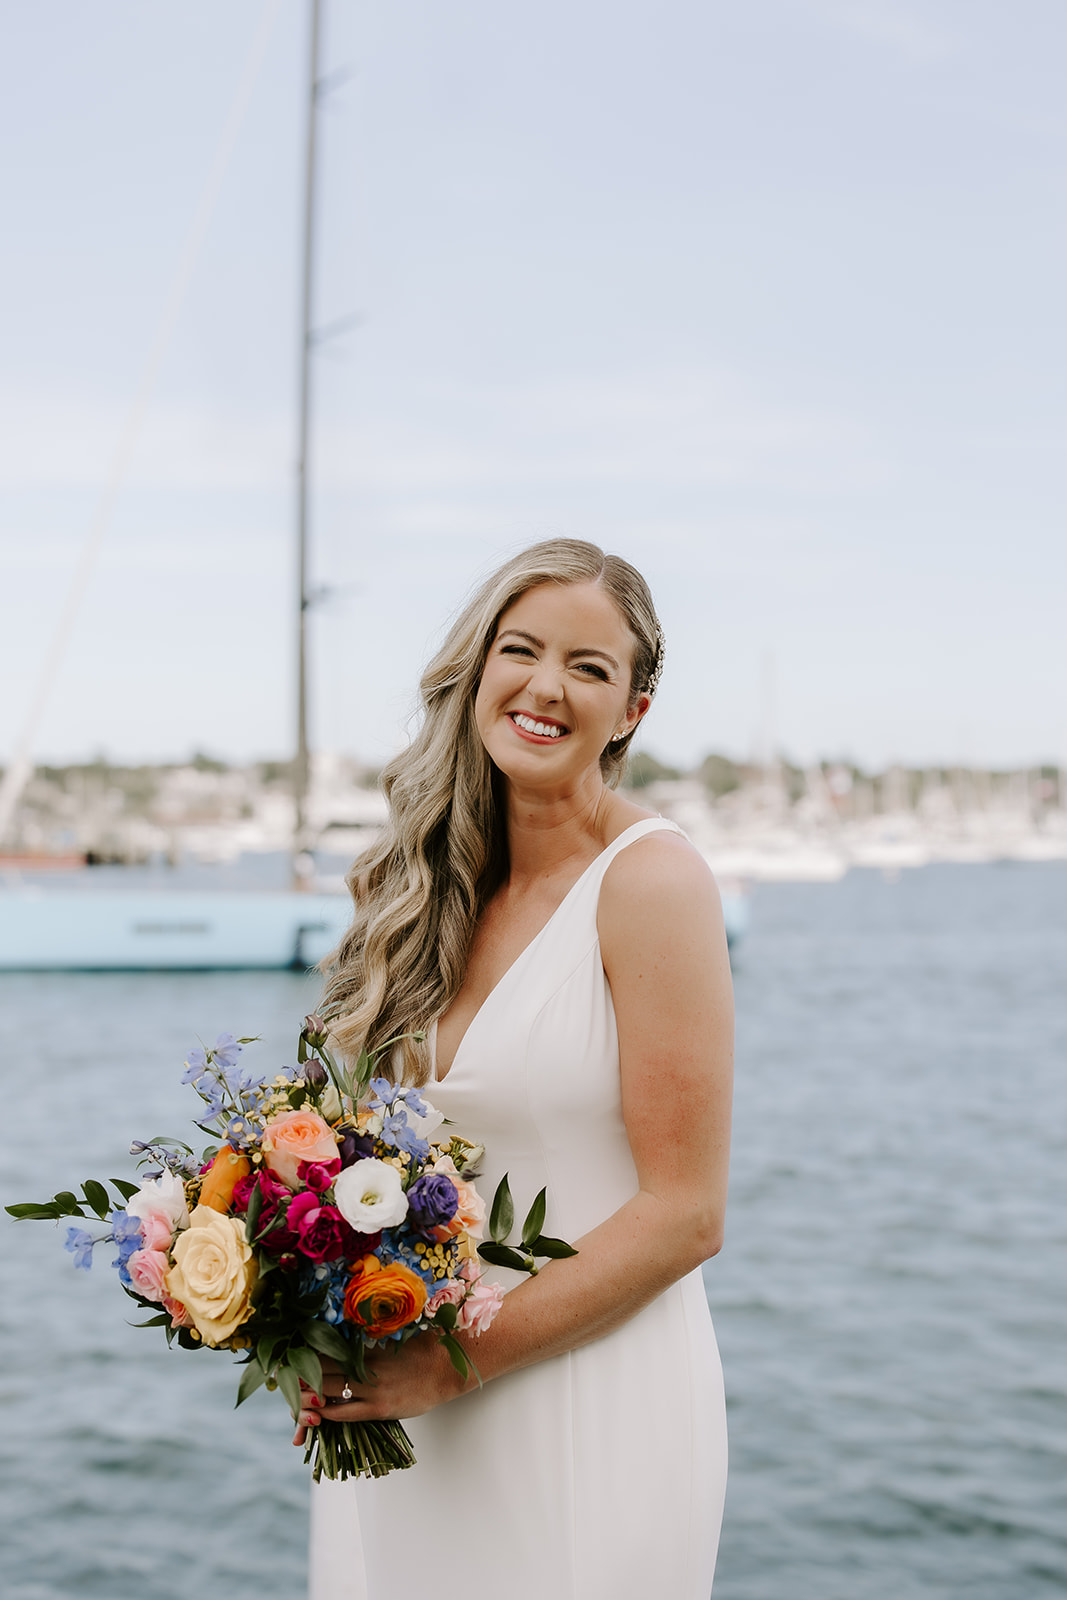 Beautiful bride poses with the sea in the background